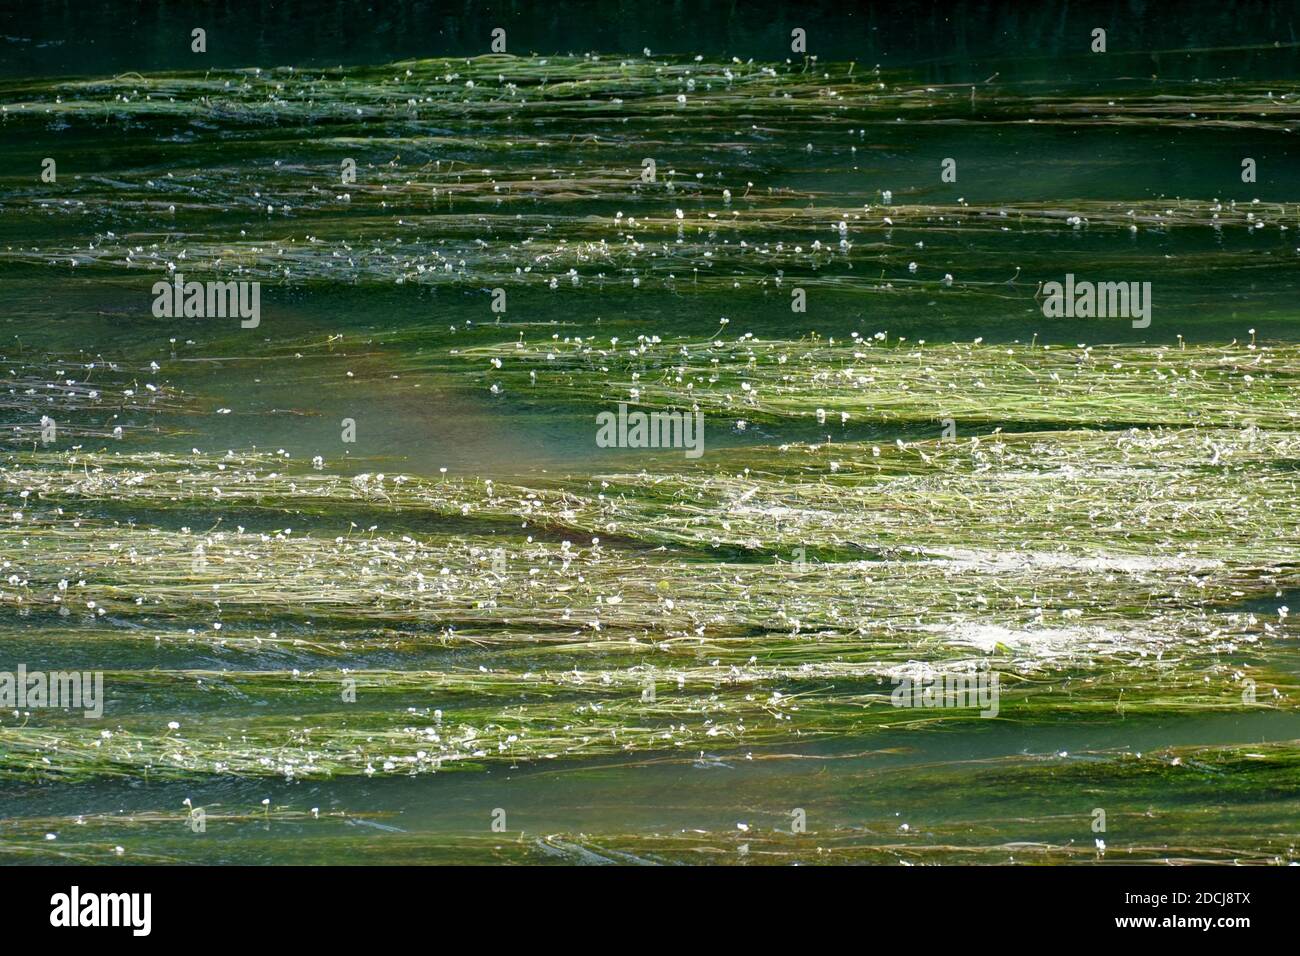 Water plants with tiny white flowers in bloom on the surface of a flowing brook illuminated by sunlight, suitable as background. Horizontal view. Stock Photo